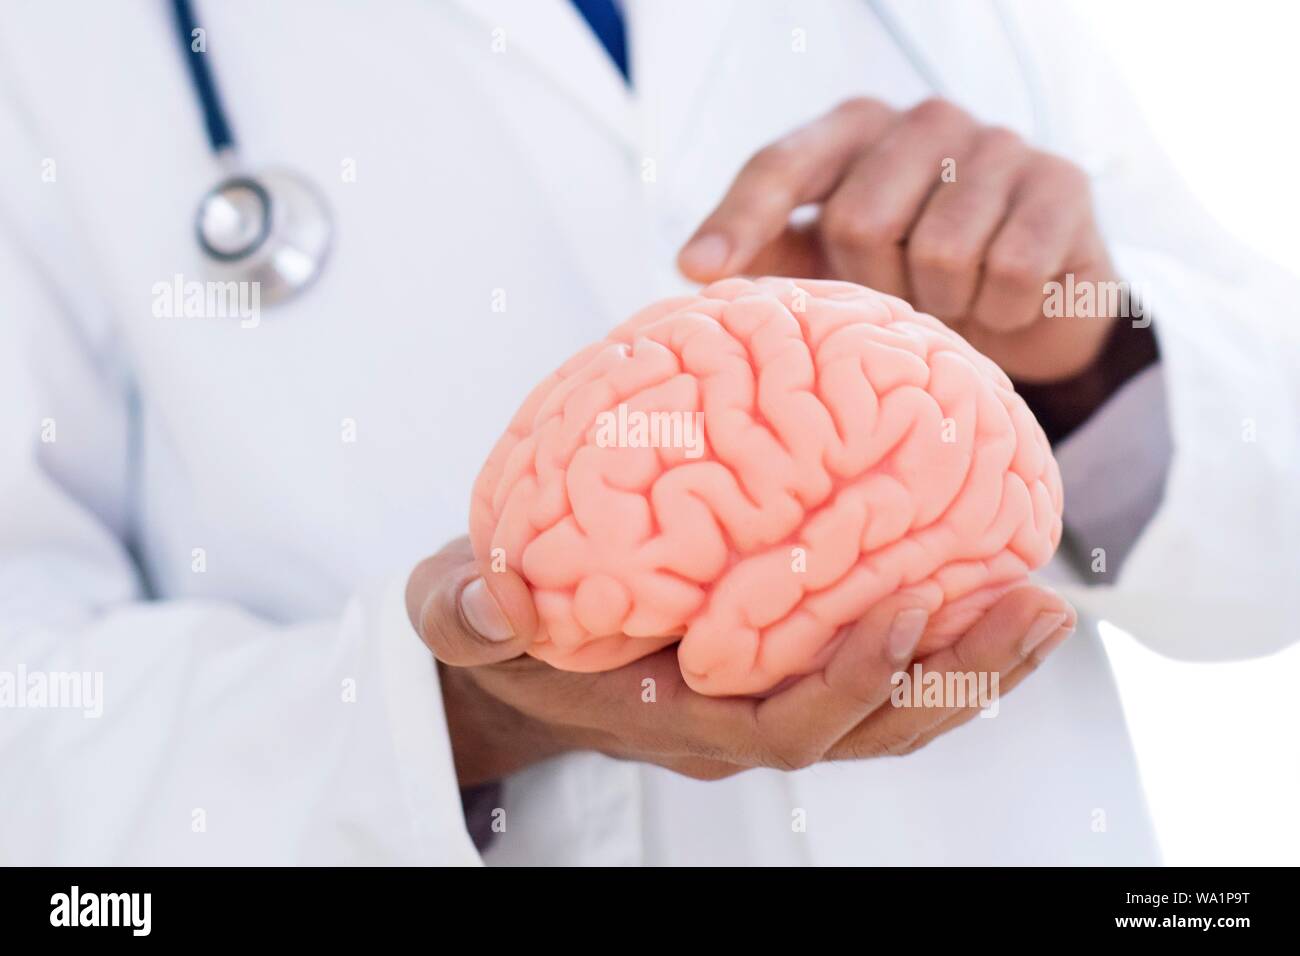 Neurologist pointing at brain model, close-up. Stock Photo